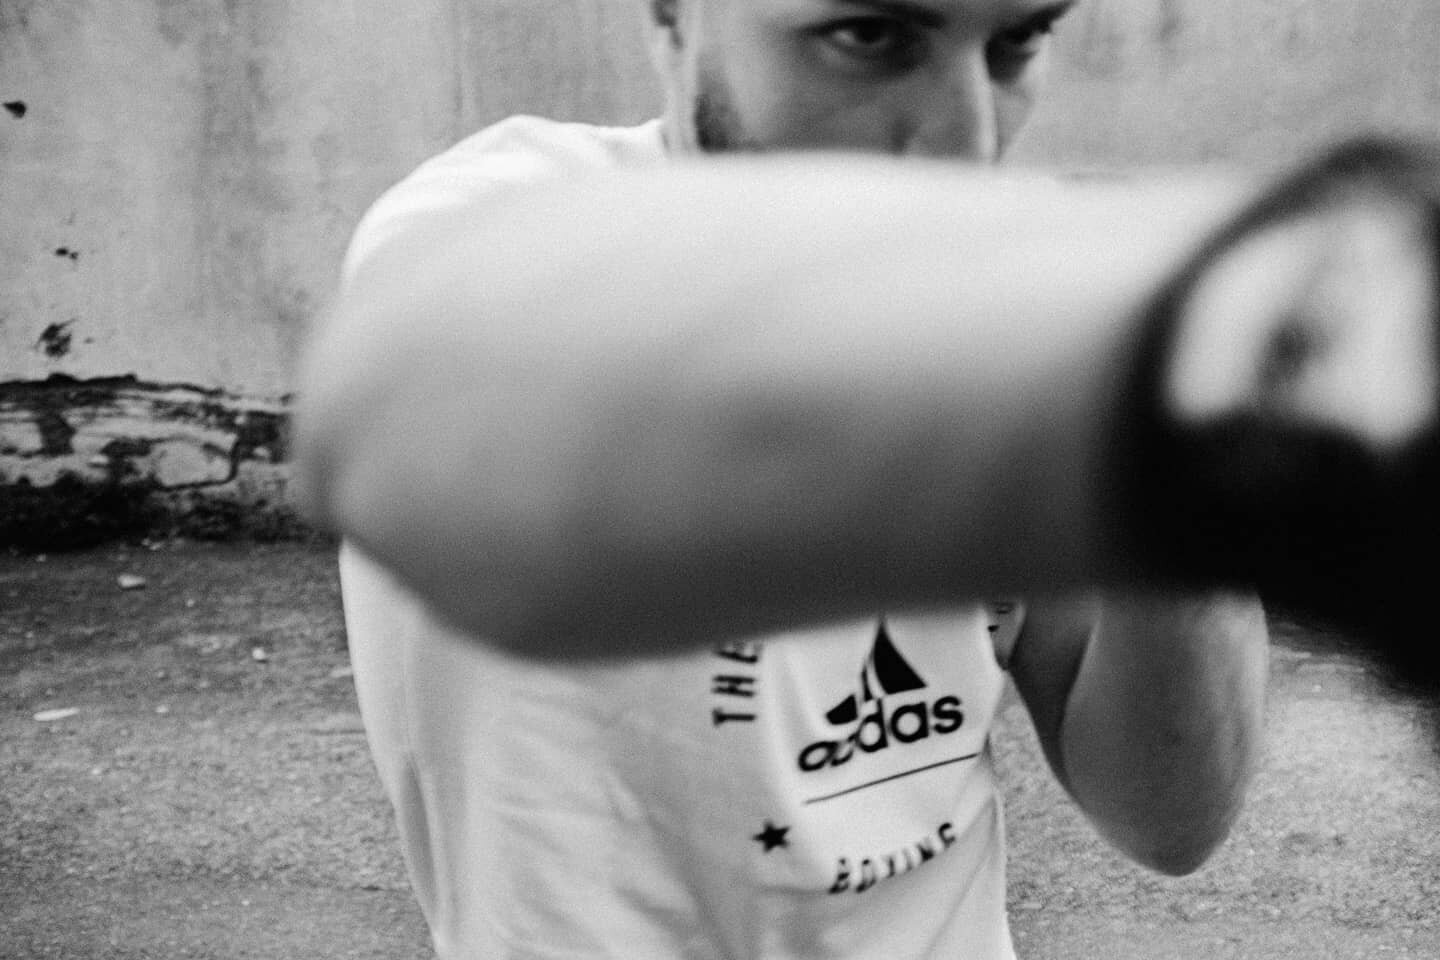 BOXING HAS THE POWER TO CHANGE LIVES

CAVALLARO FOR @adidasboxing

#fujifollowme #adidas #boxing